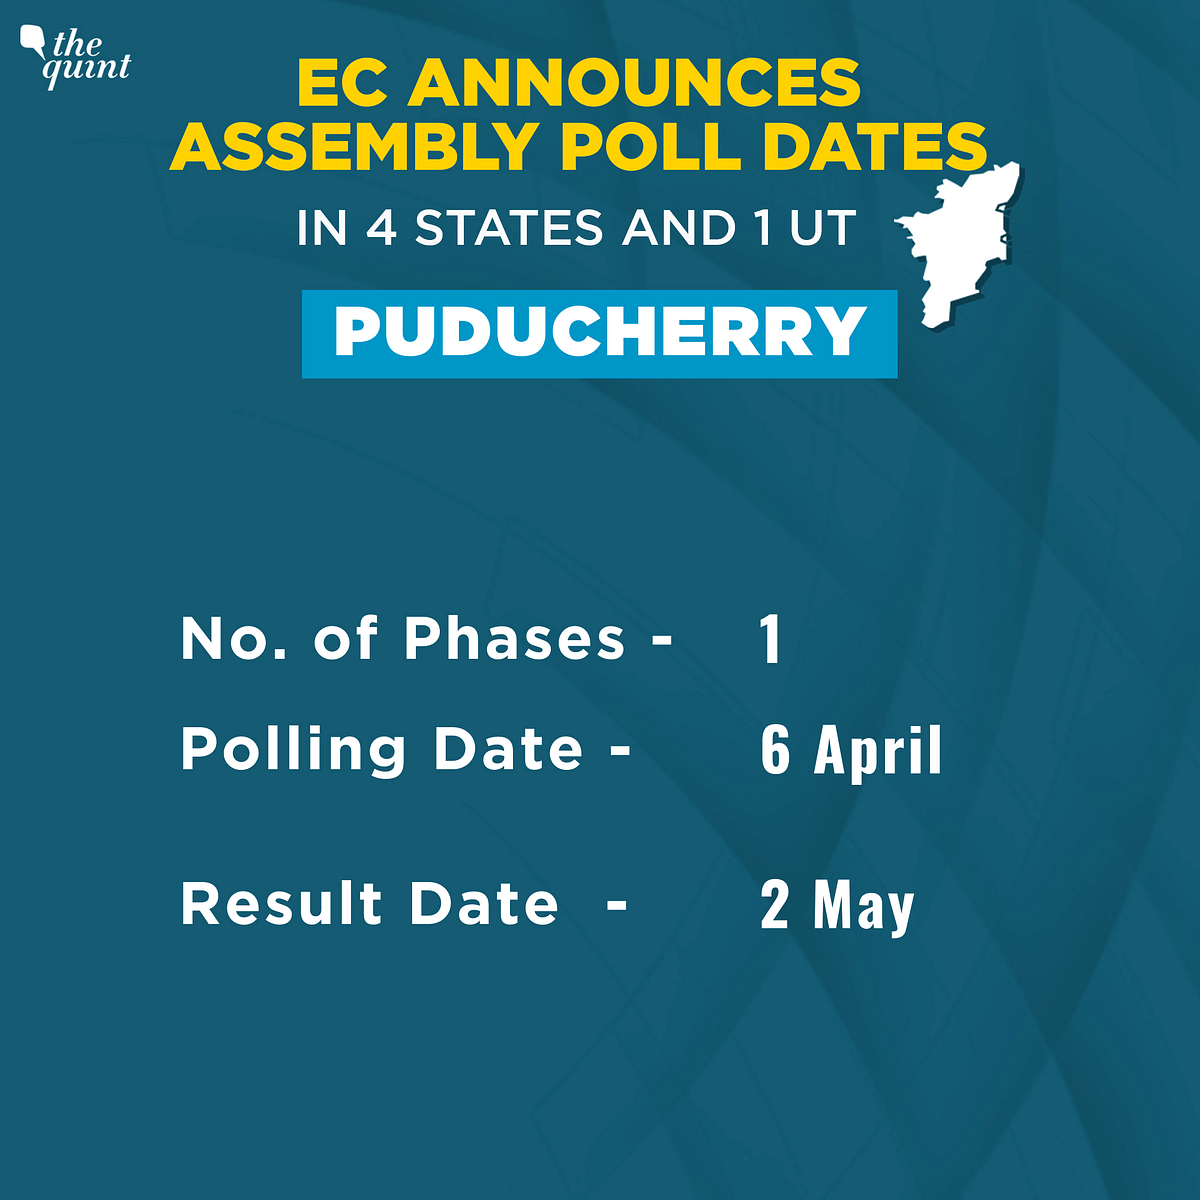 The Assembly elections in West Bengal, Assam, Kerala, Tamil Nadu, and Puducherry will kick off from 27 March.